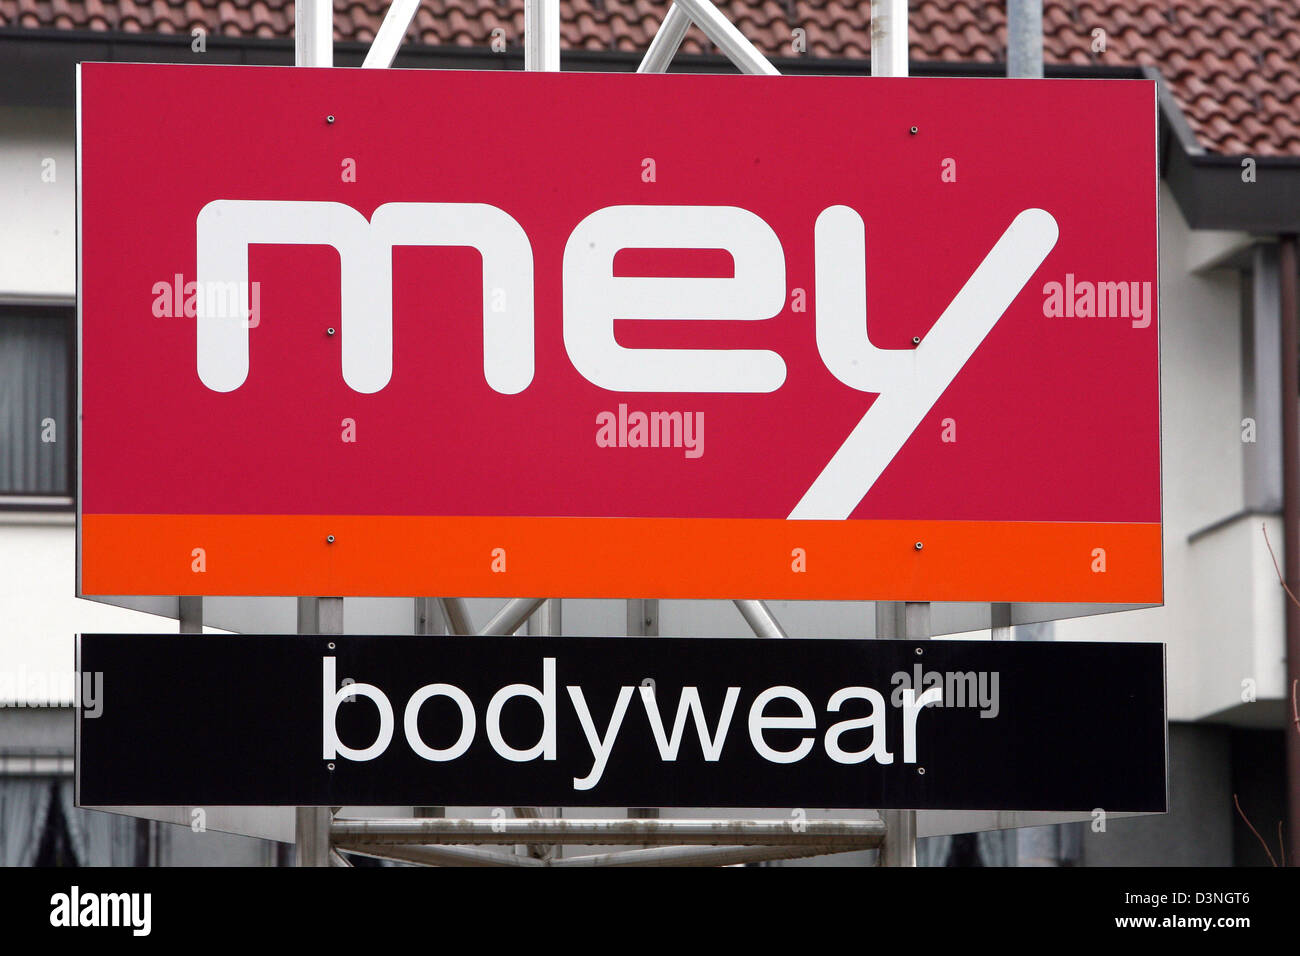 https://c8.alamy.com/comp/D3NGT6/the-picture-shows-the-logo-of-mey-bodywear-in-albstadt-germany-monday-D3NGT6.jpg